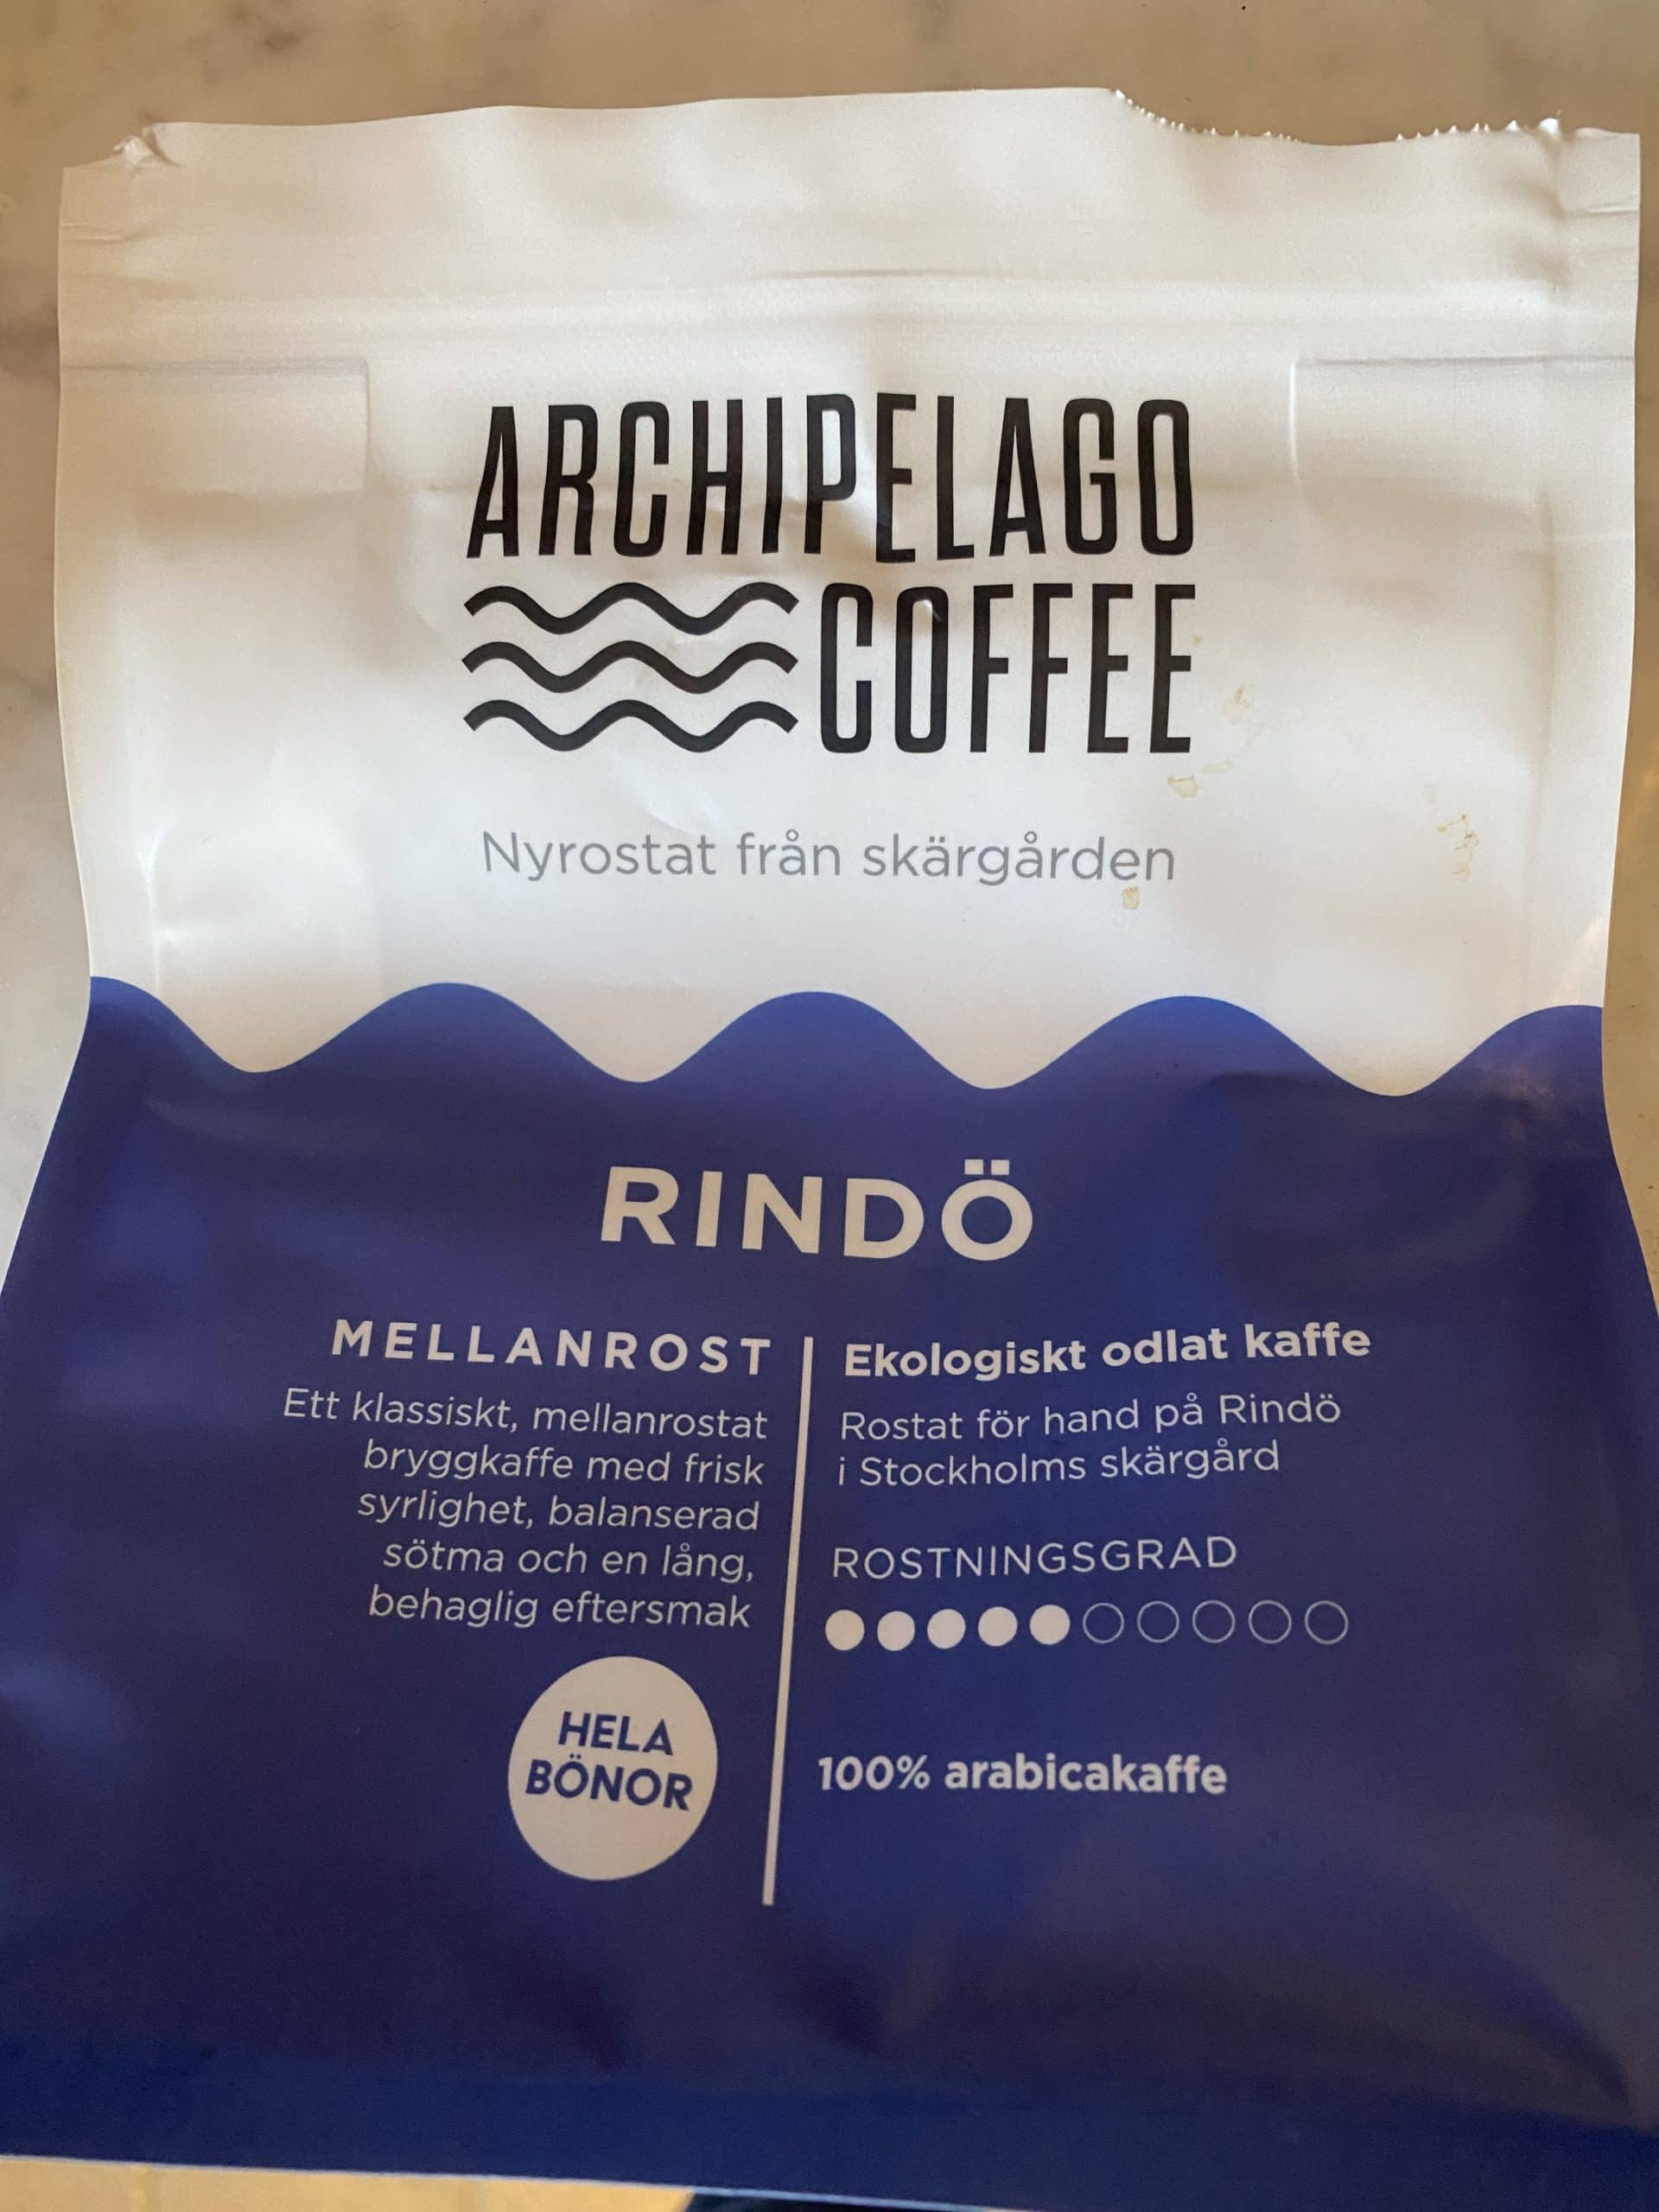 Image shows a bag (ripped open at top) of Archipelago Coffee's Rindo Blend.